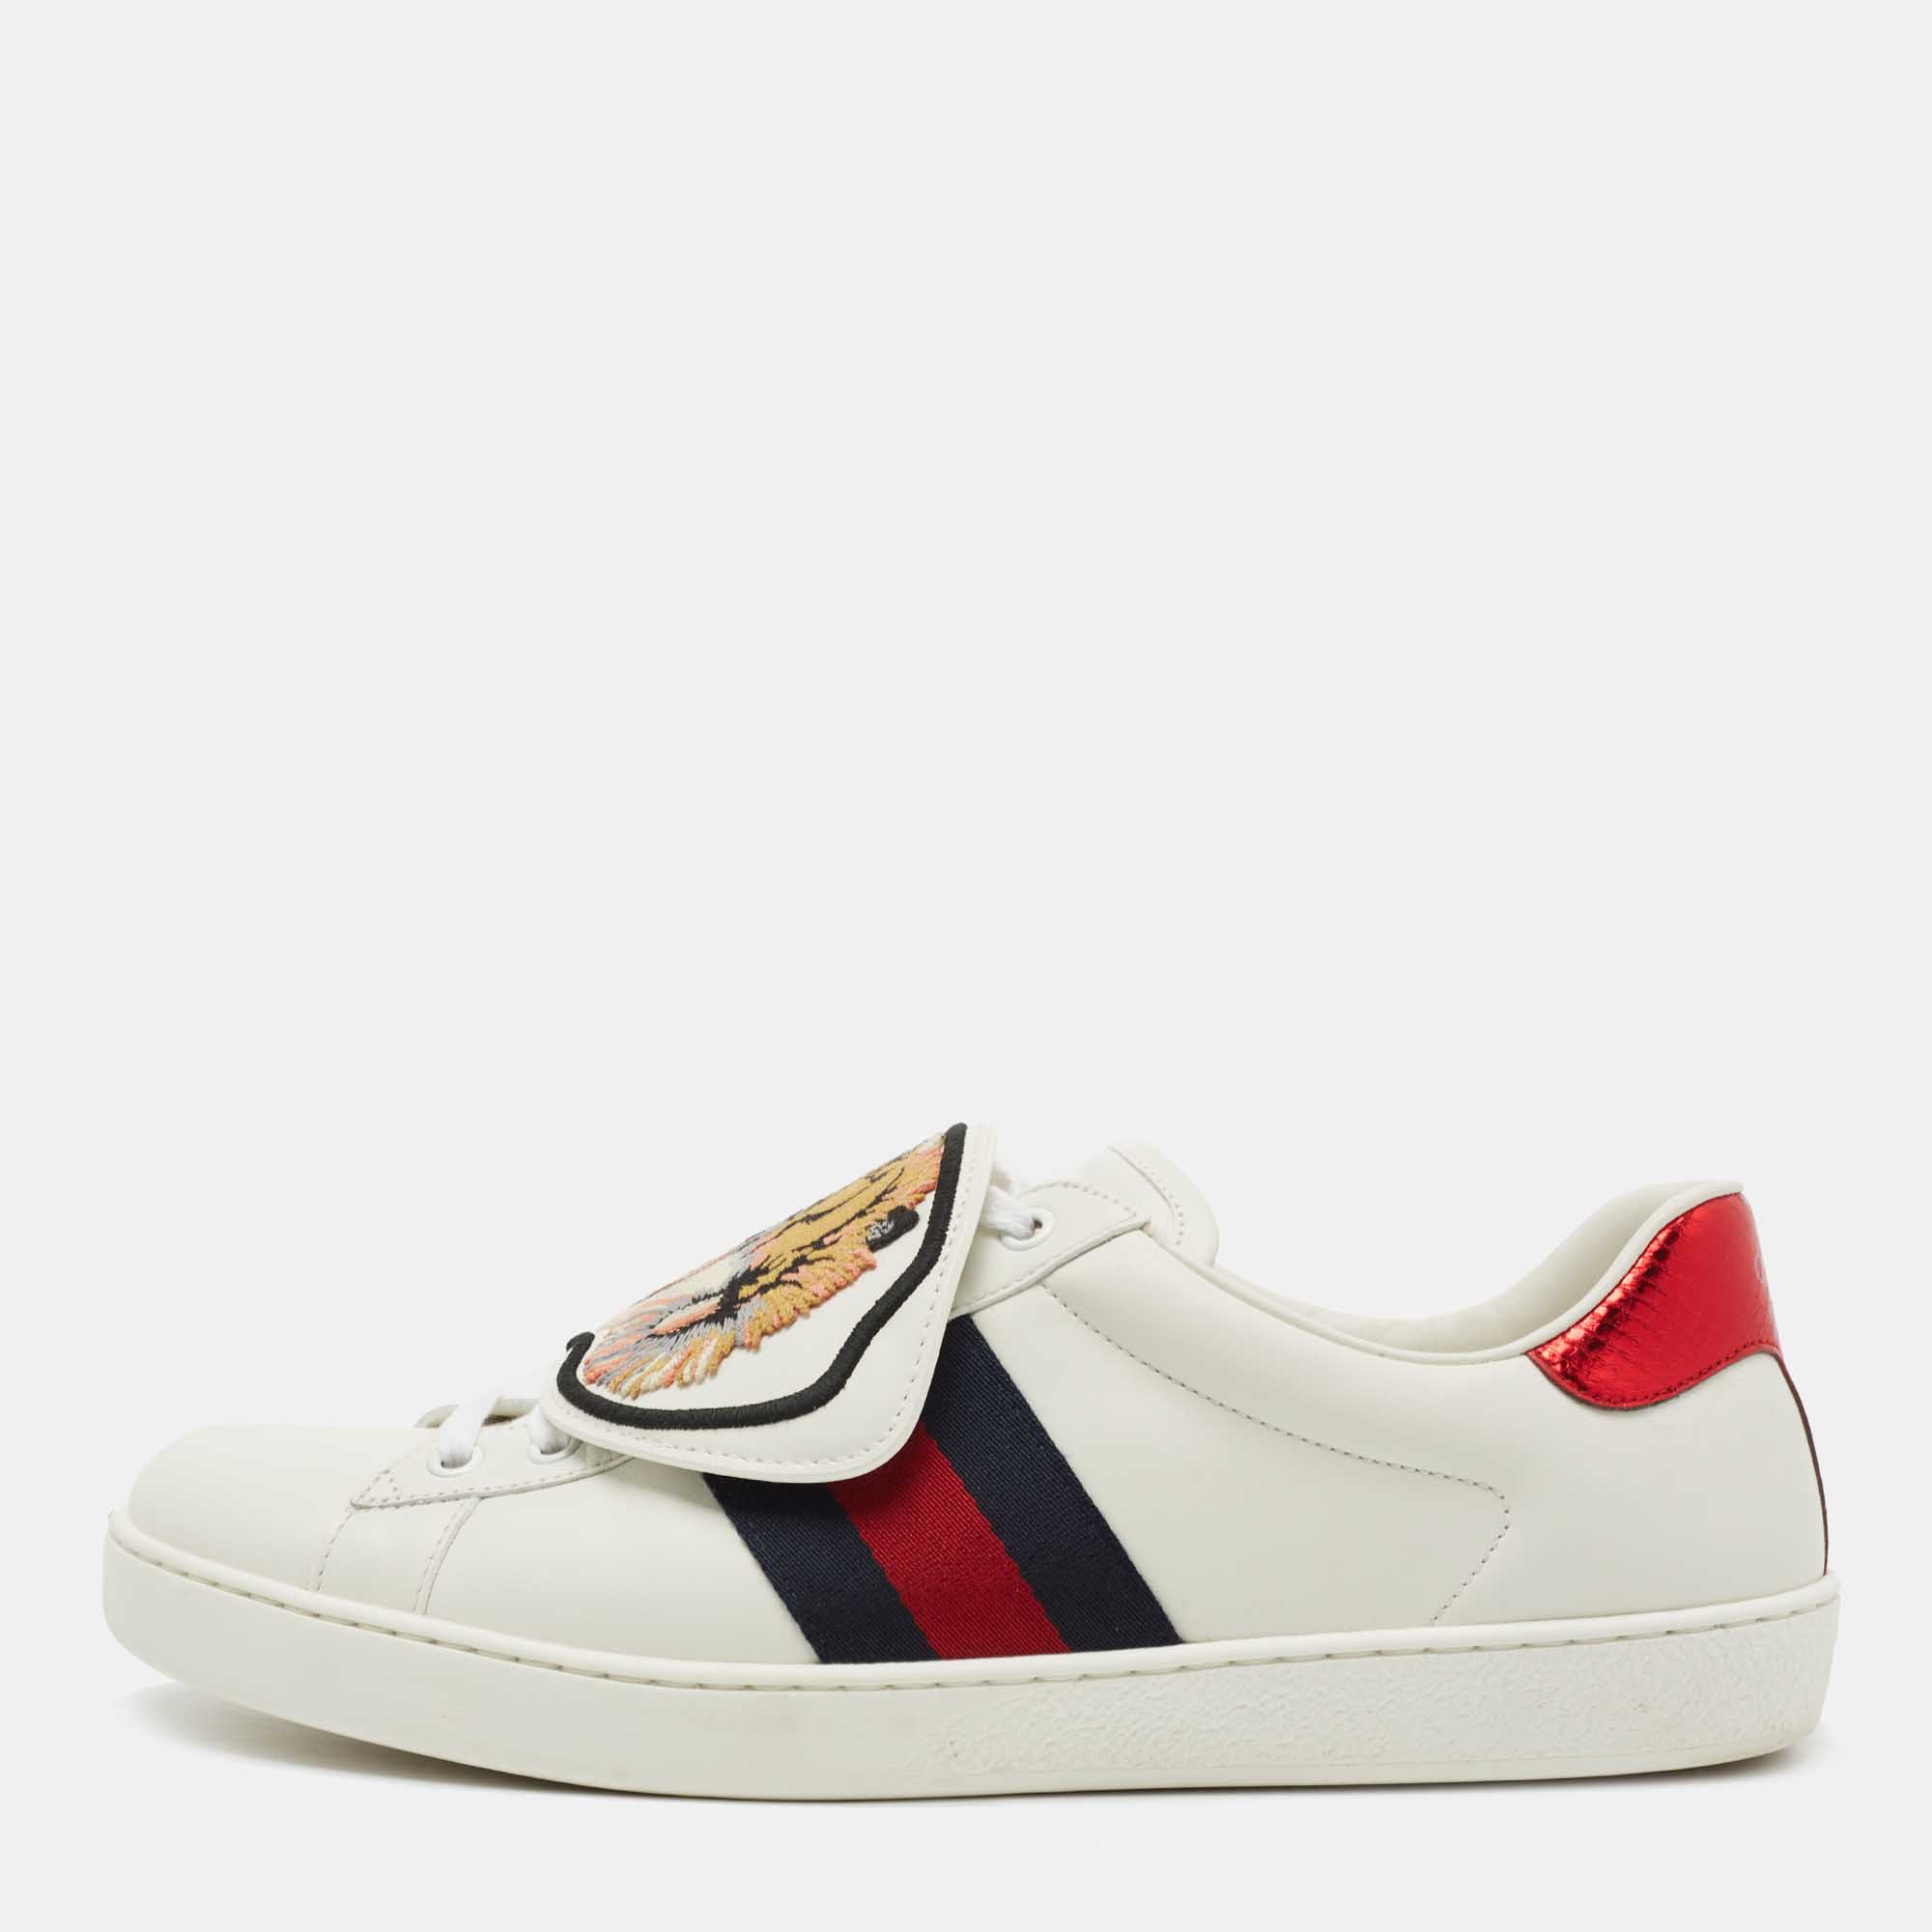 Pre-owned Gucci White Leather New Ace Tiger Strap Sneakers Size 43